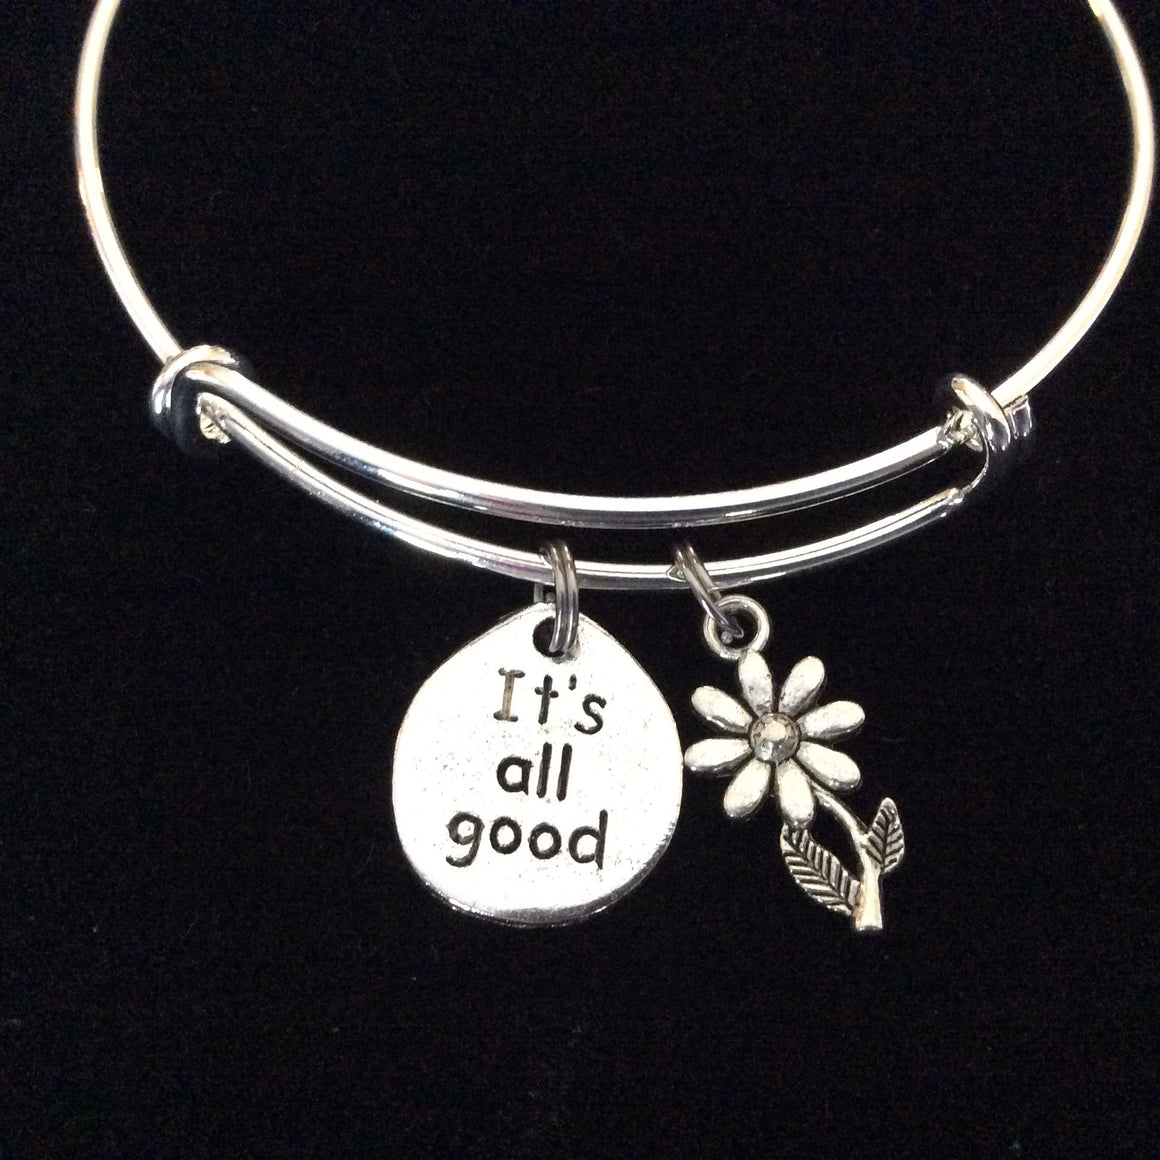 It's All Good with Daisy Charm Silver Bangle